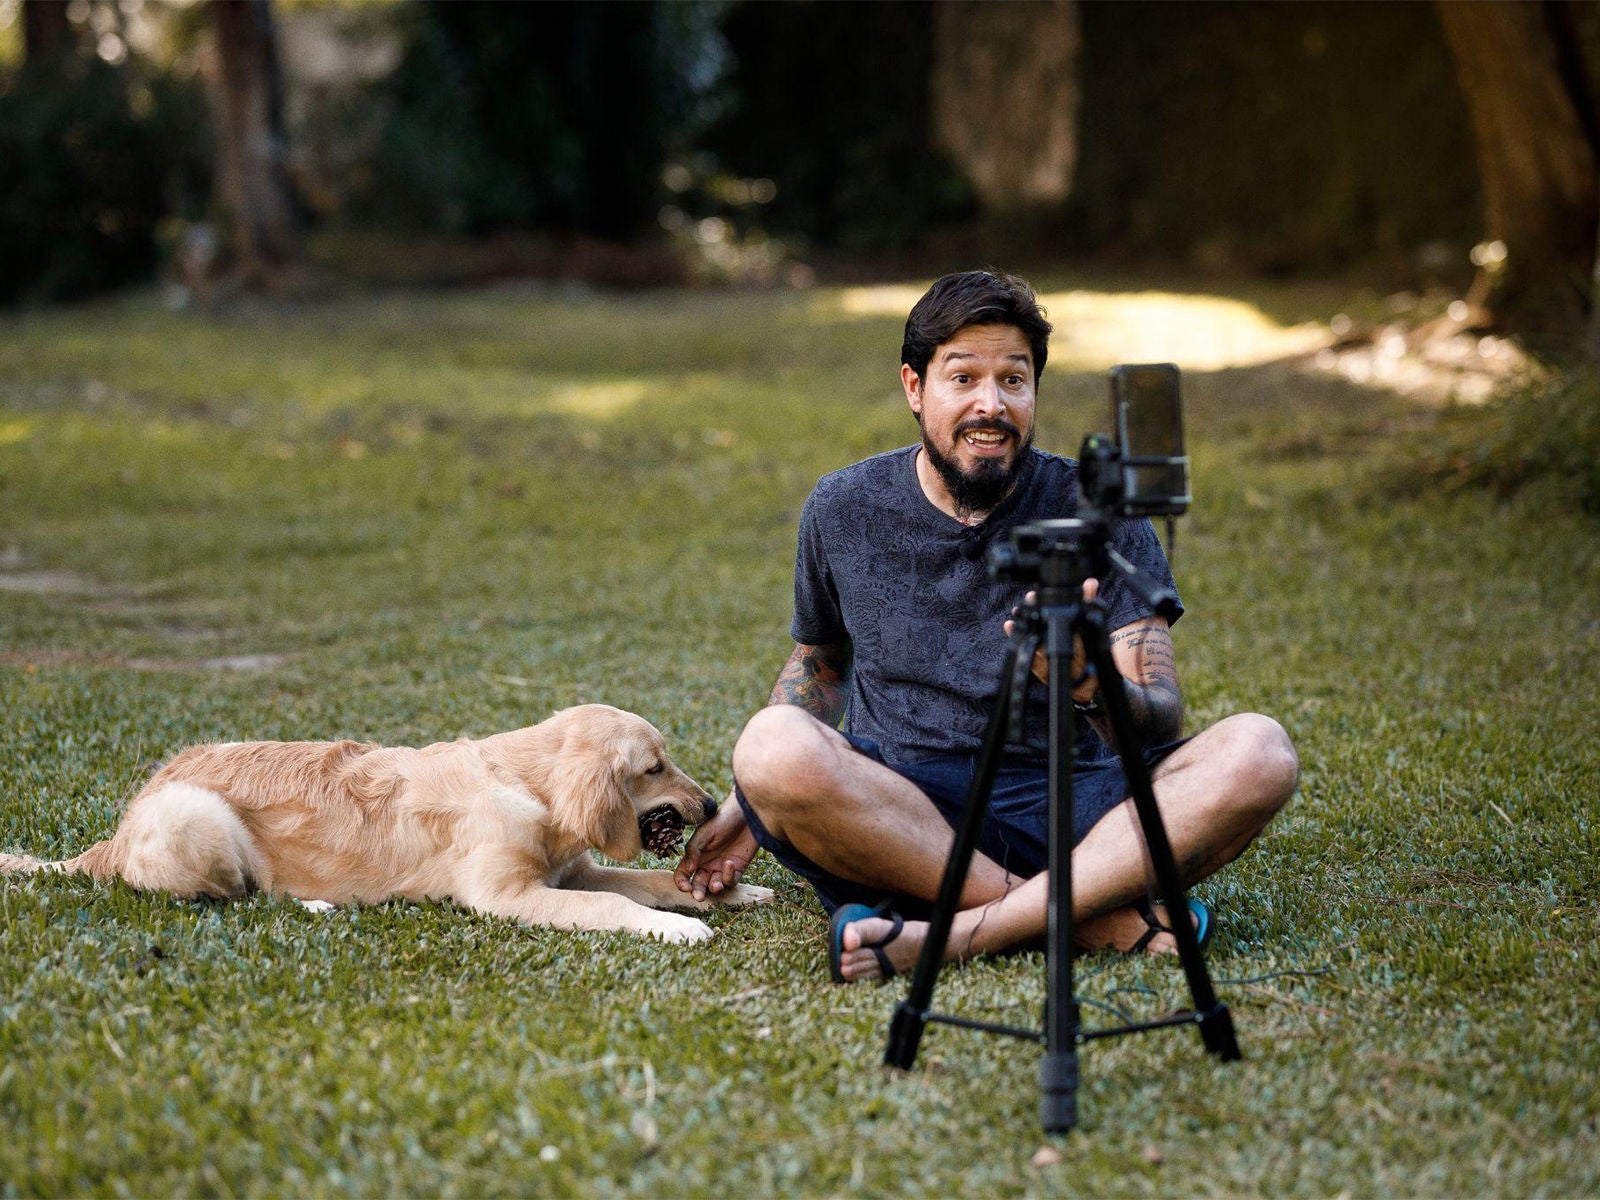 In a park, a man and his dog record content, with his smart phone, for social media.